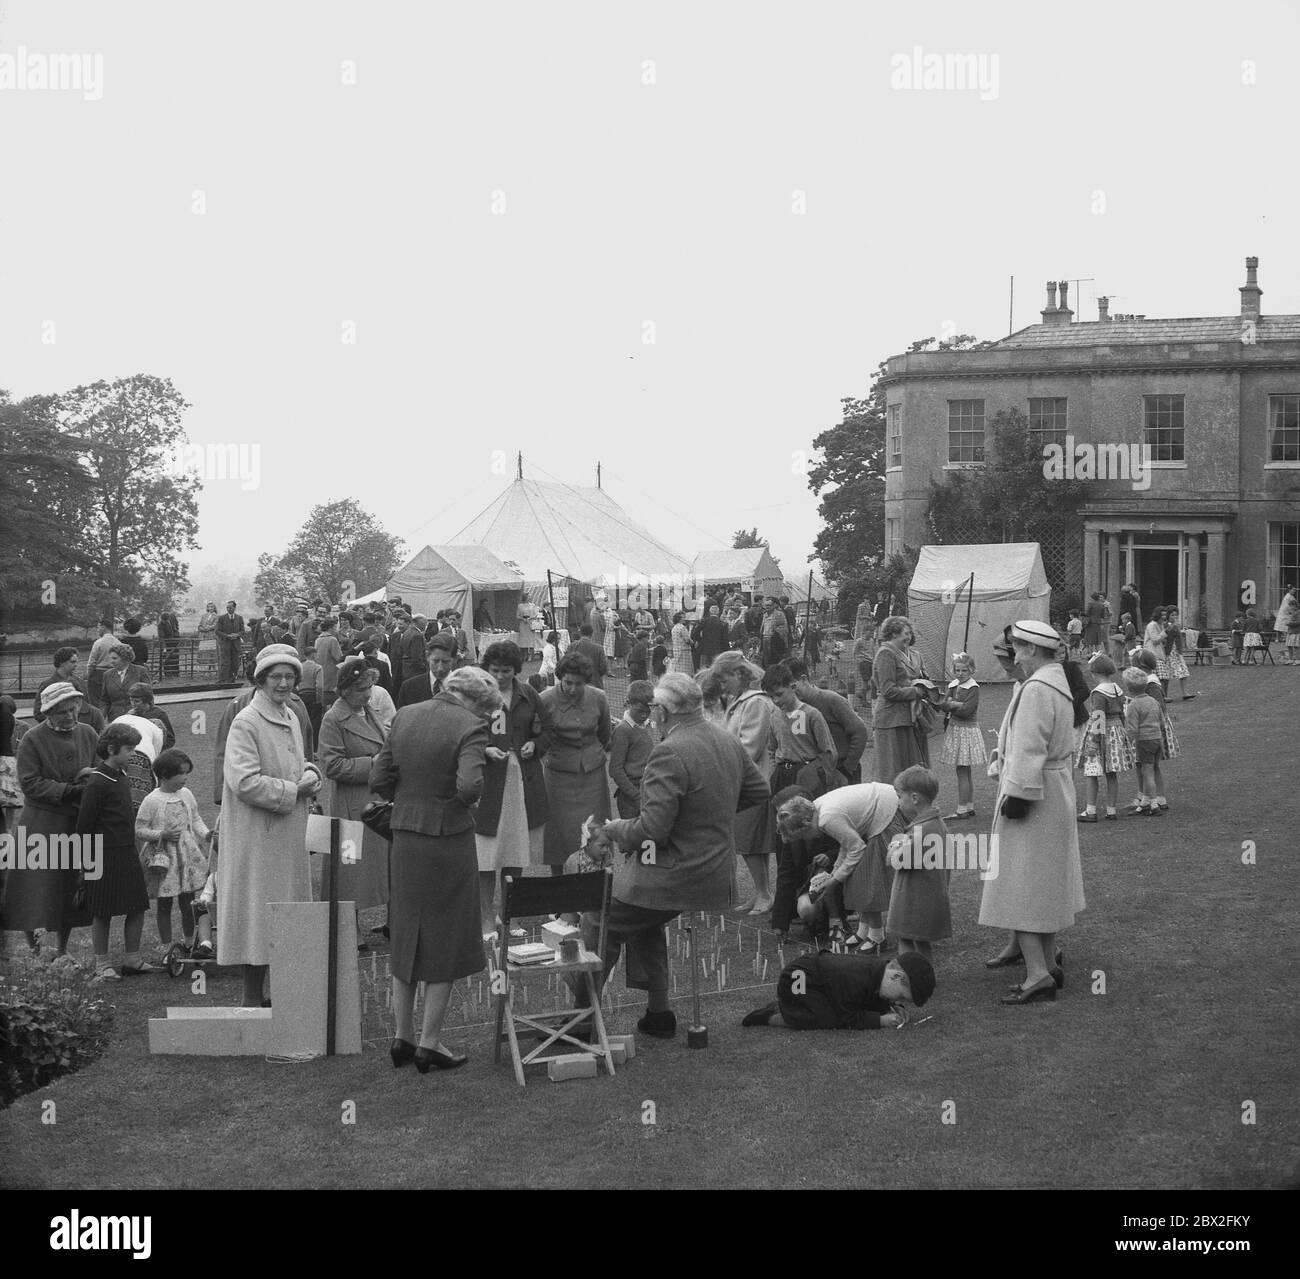 1950s, historical, adults and children on the lawns at a traditional English Country House garden party or fete, with some mothers snd children queuing up to play a game, England, UK. Perhaps the heyday of the 'fete', was in this era when a large country house of the village beionging  to a local landowner or squire would hold in the grounds a garden party for local people to come together raise monies for good causes in their community. Stock Photo